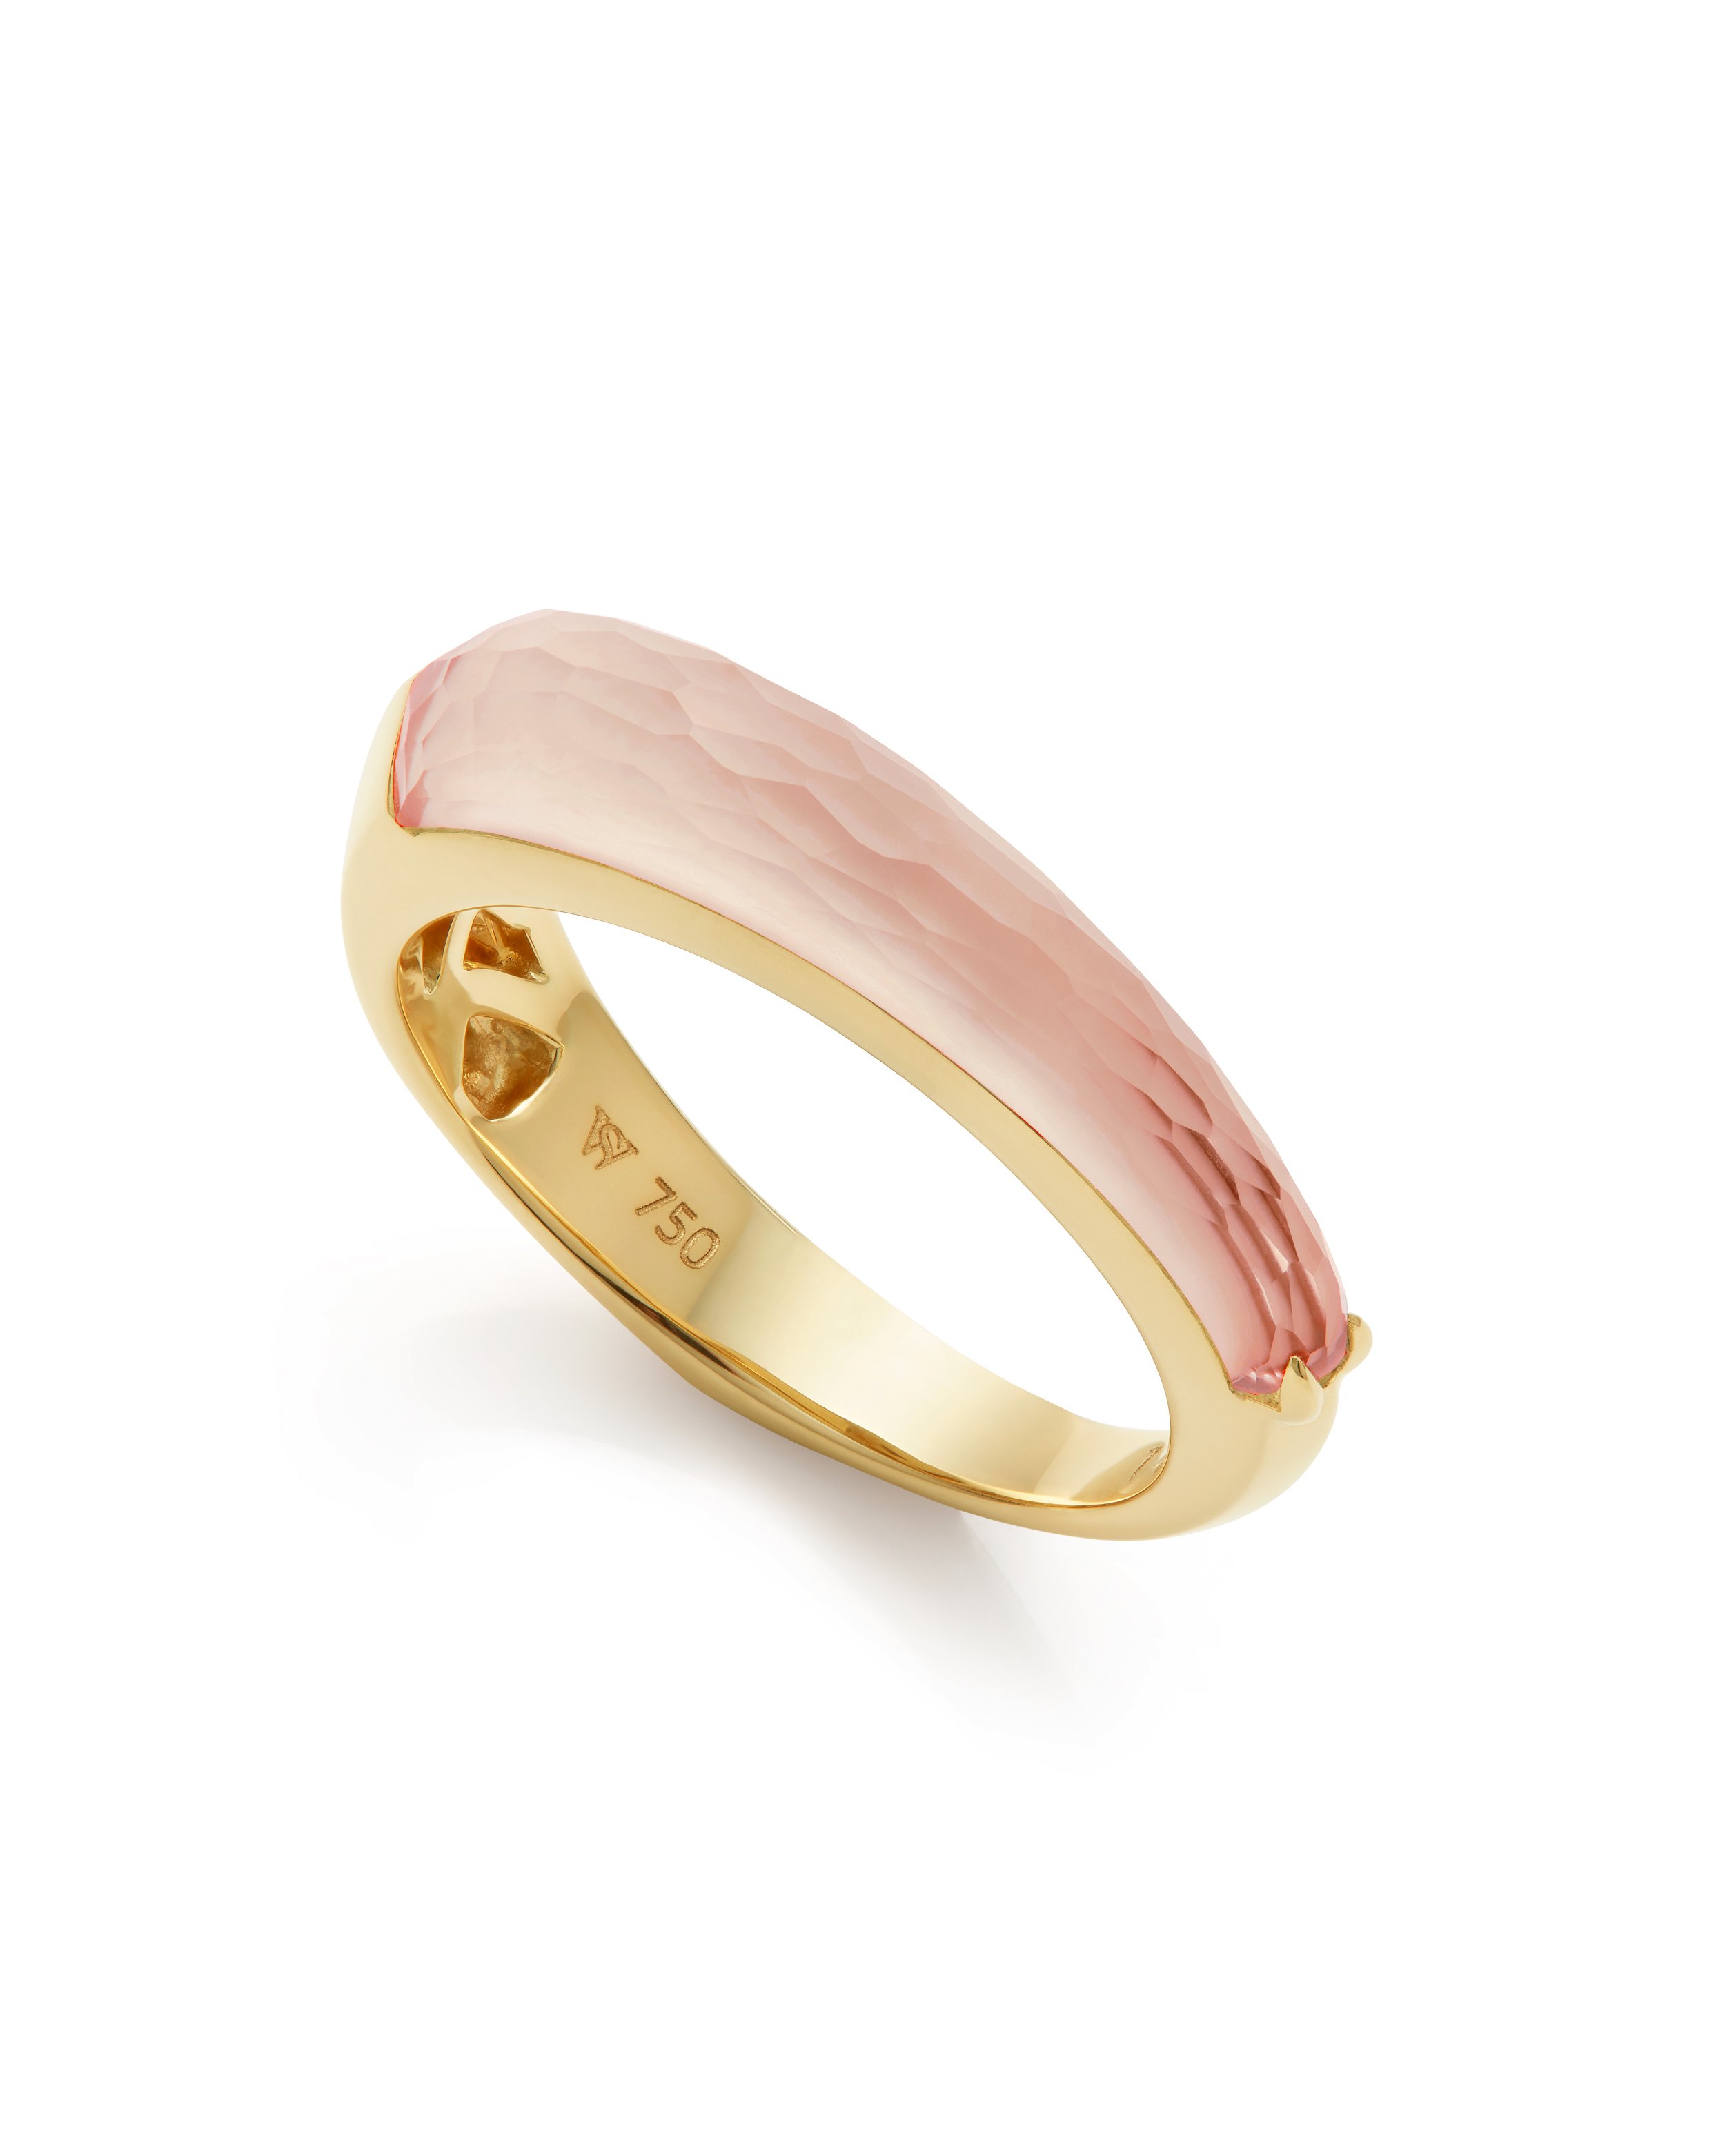 CH2 Shard Stack Ring with Peach Quartz in 18kt Yellow Gold - Size 7